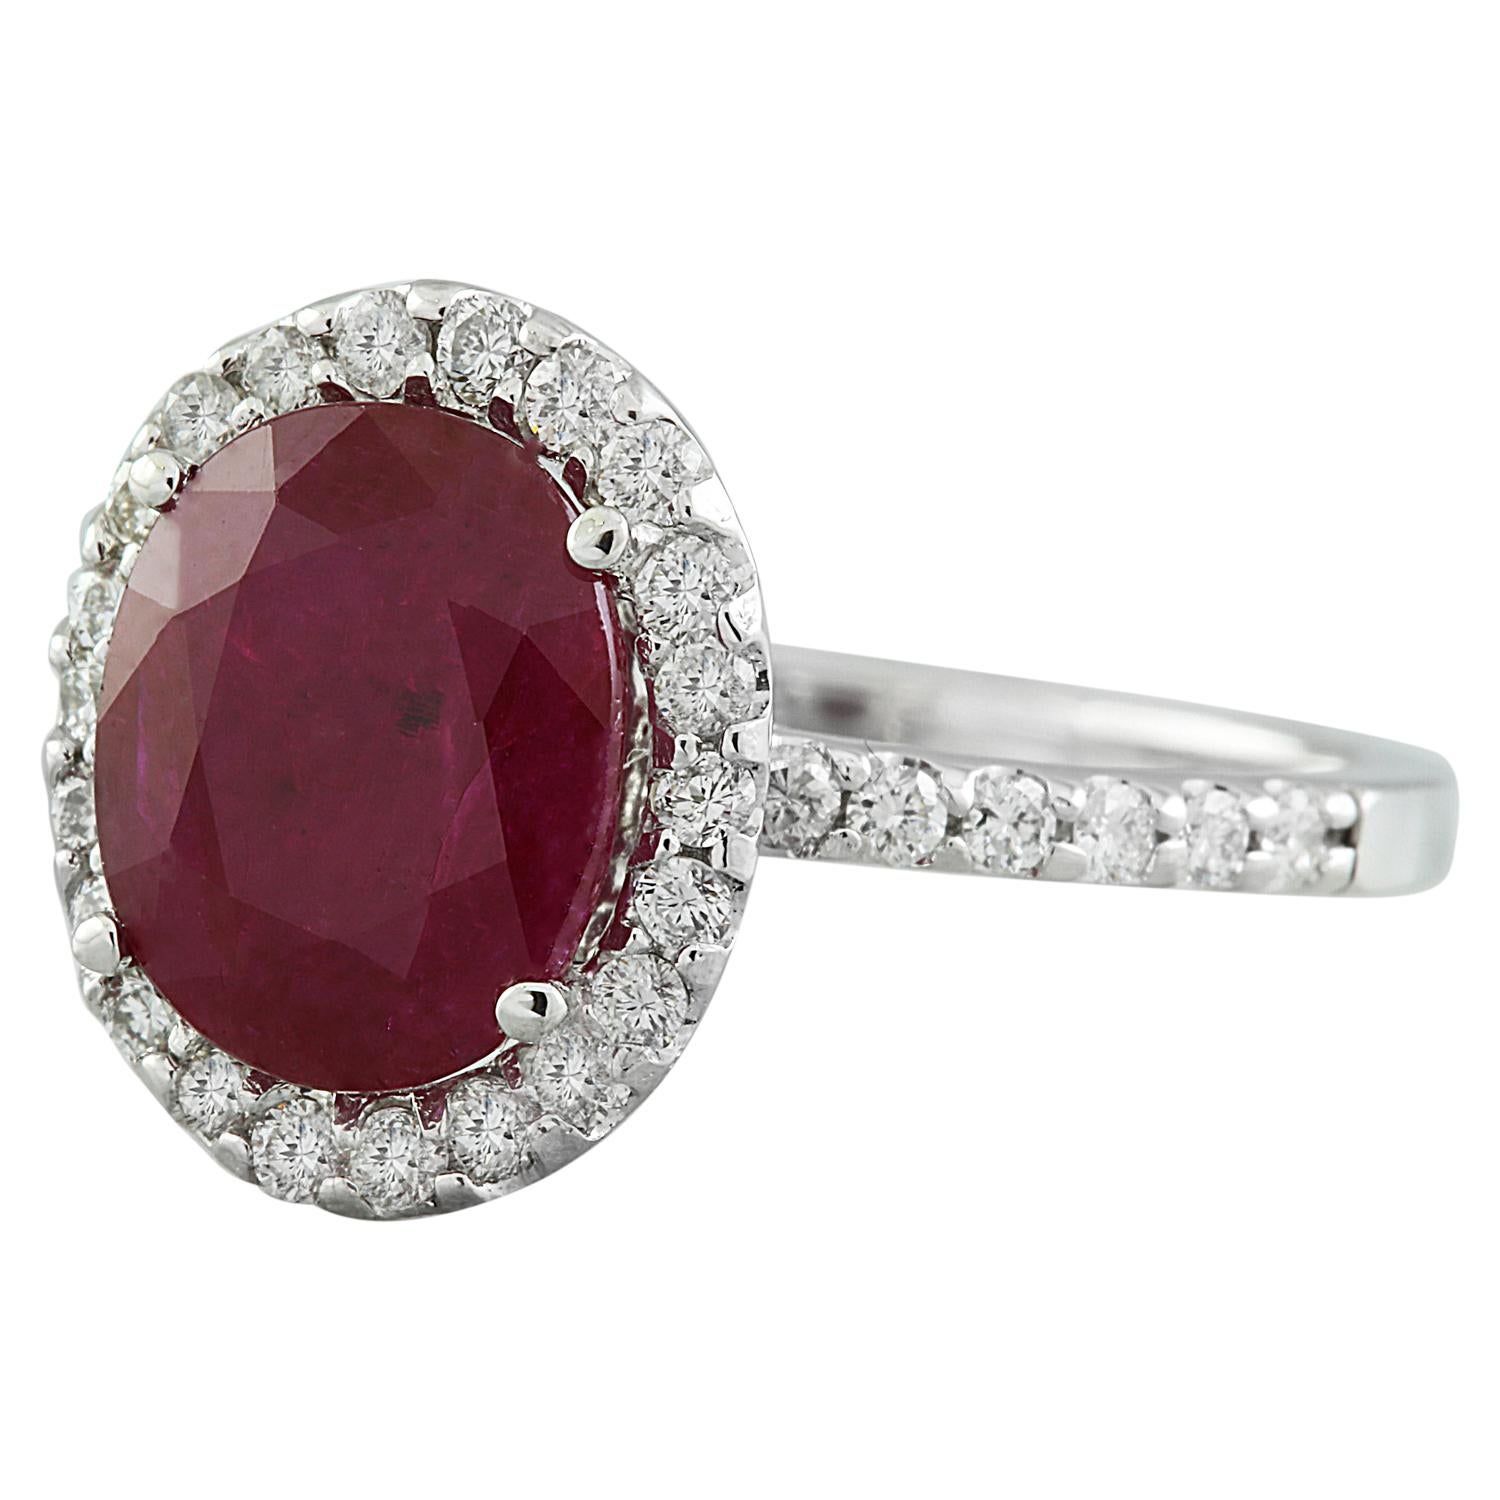 3.44 Carat Natural Ruby 14 Karat Solid White Gold Diamond Ring
Stamped: 14K 
Total Ring Weight: 3.5 Grams 
Ruby Weight: 2.80 Carat (10.00x8.00 Millimeters) 
Diamond Weight: 0.64 carat (F-G Color, VS2-SI1 Clarity )
Quantity: 34
Face Measures: